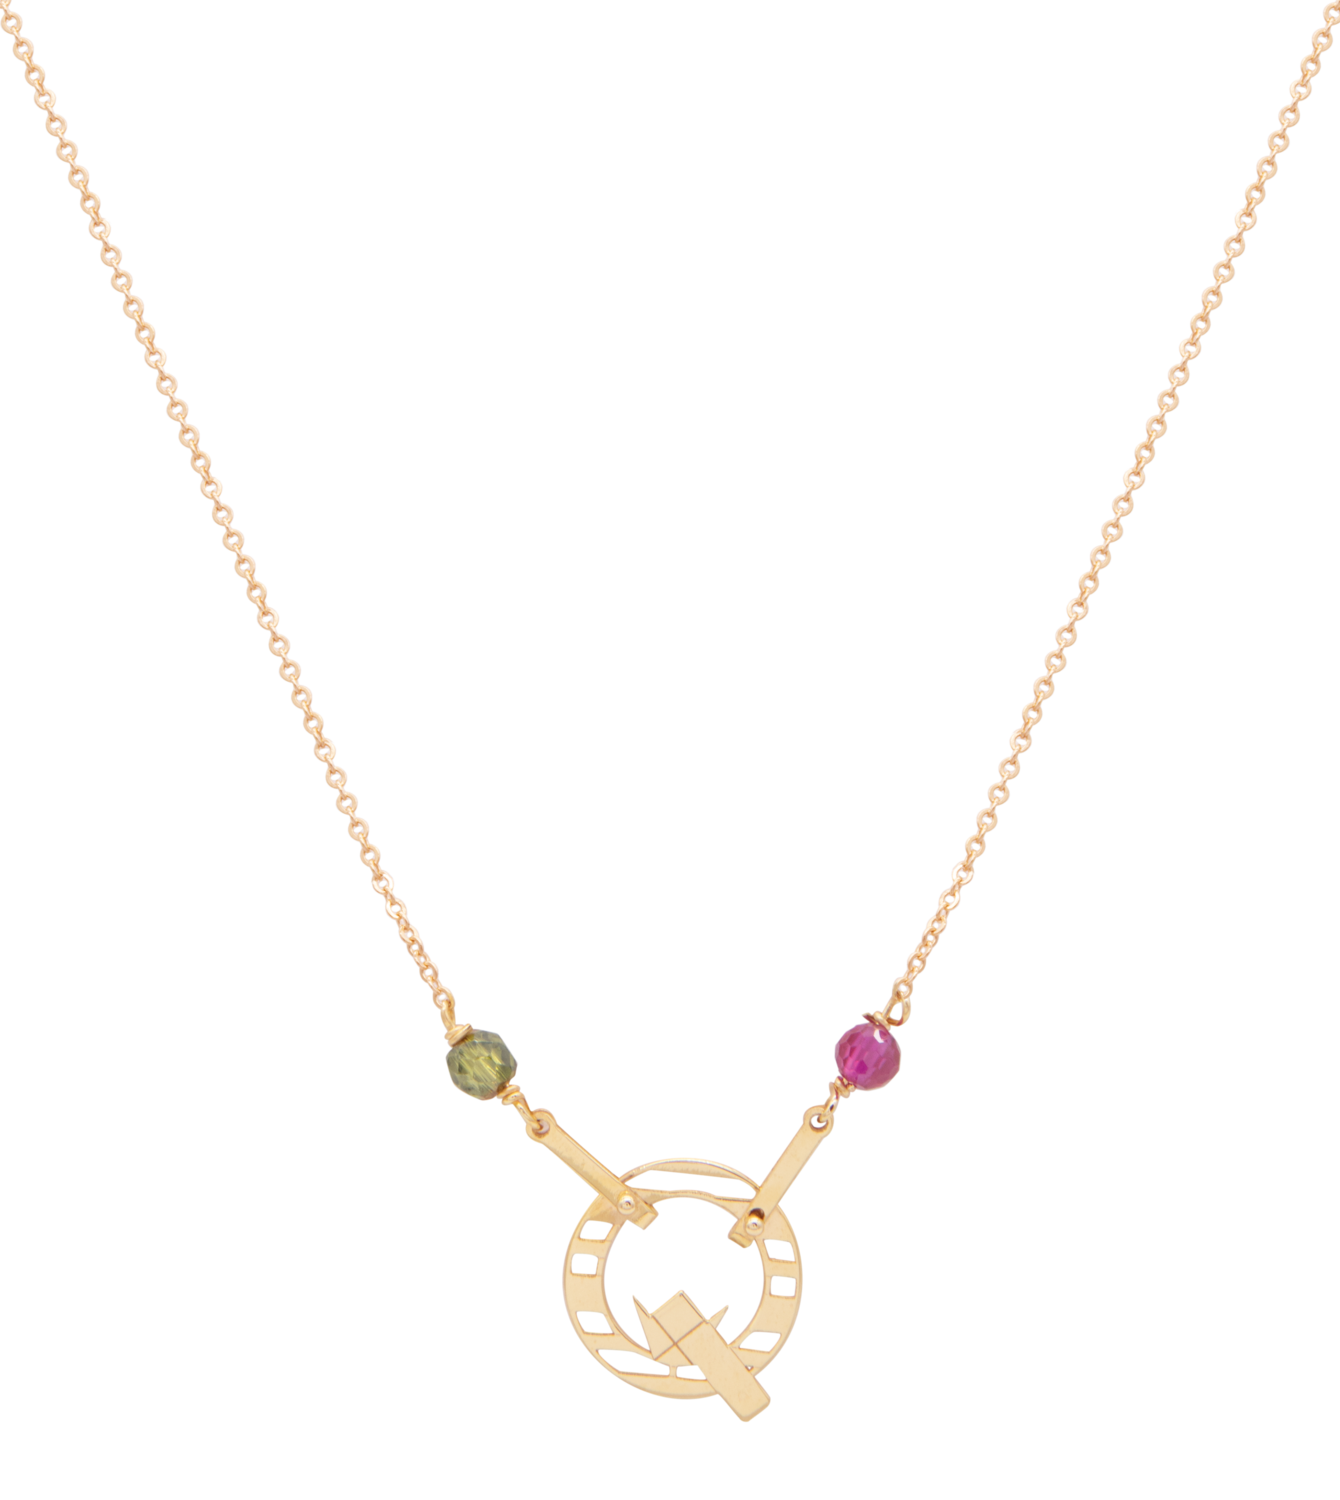 Q for Queen Gold Necklace with Colored Stones